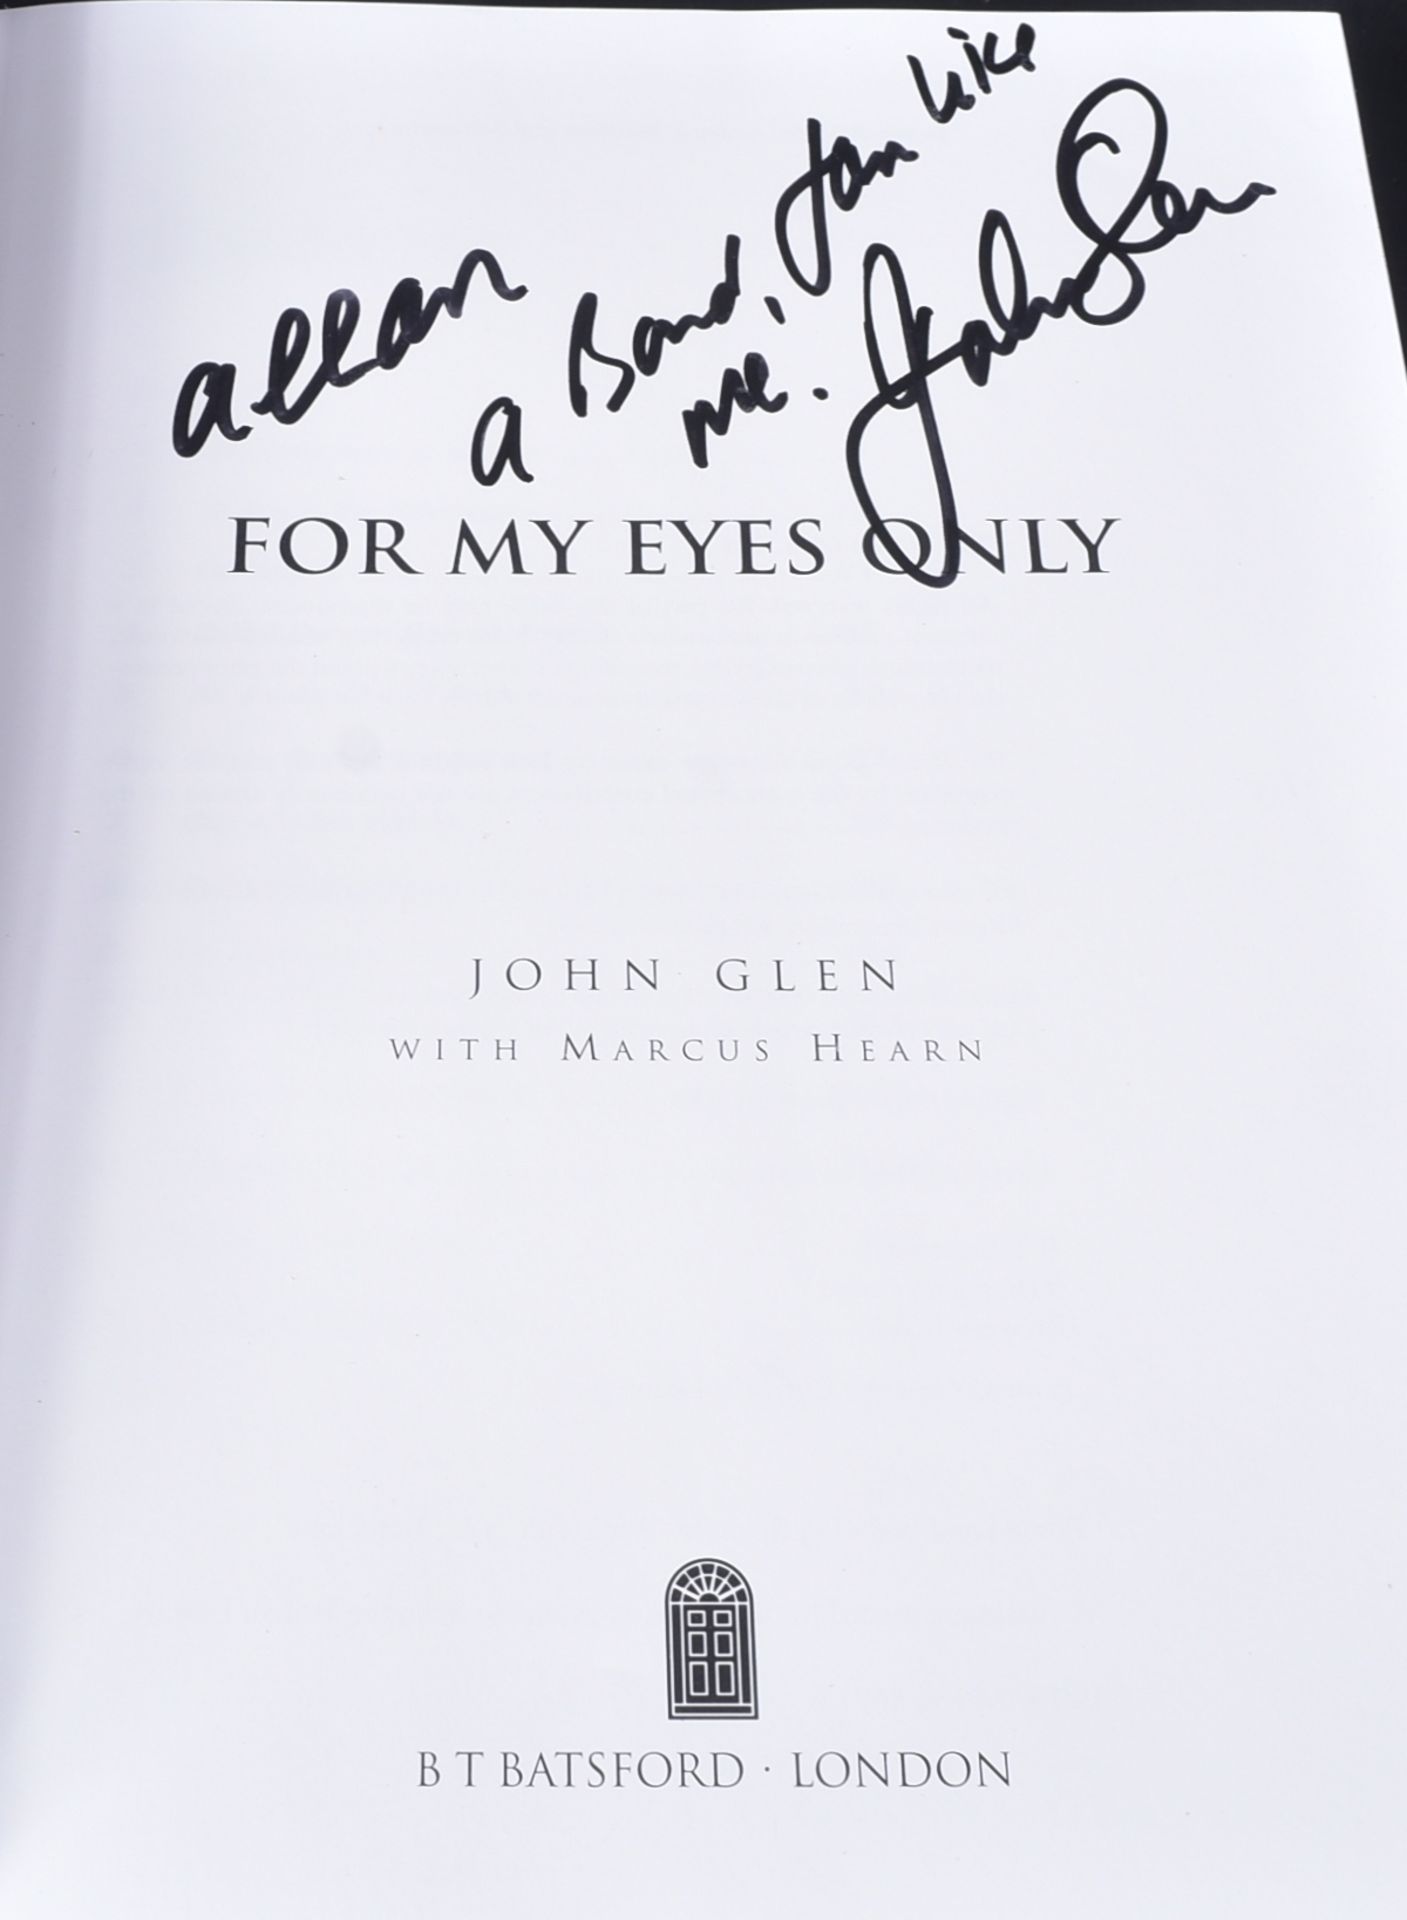 JAMES BOND - FOR MY EYES ONLY SIGNED BOOK BY JOHN GLEN - Image 2 of 2